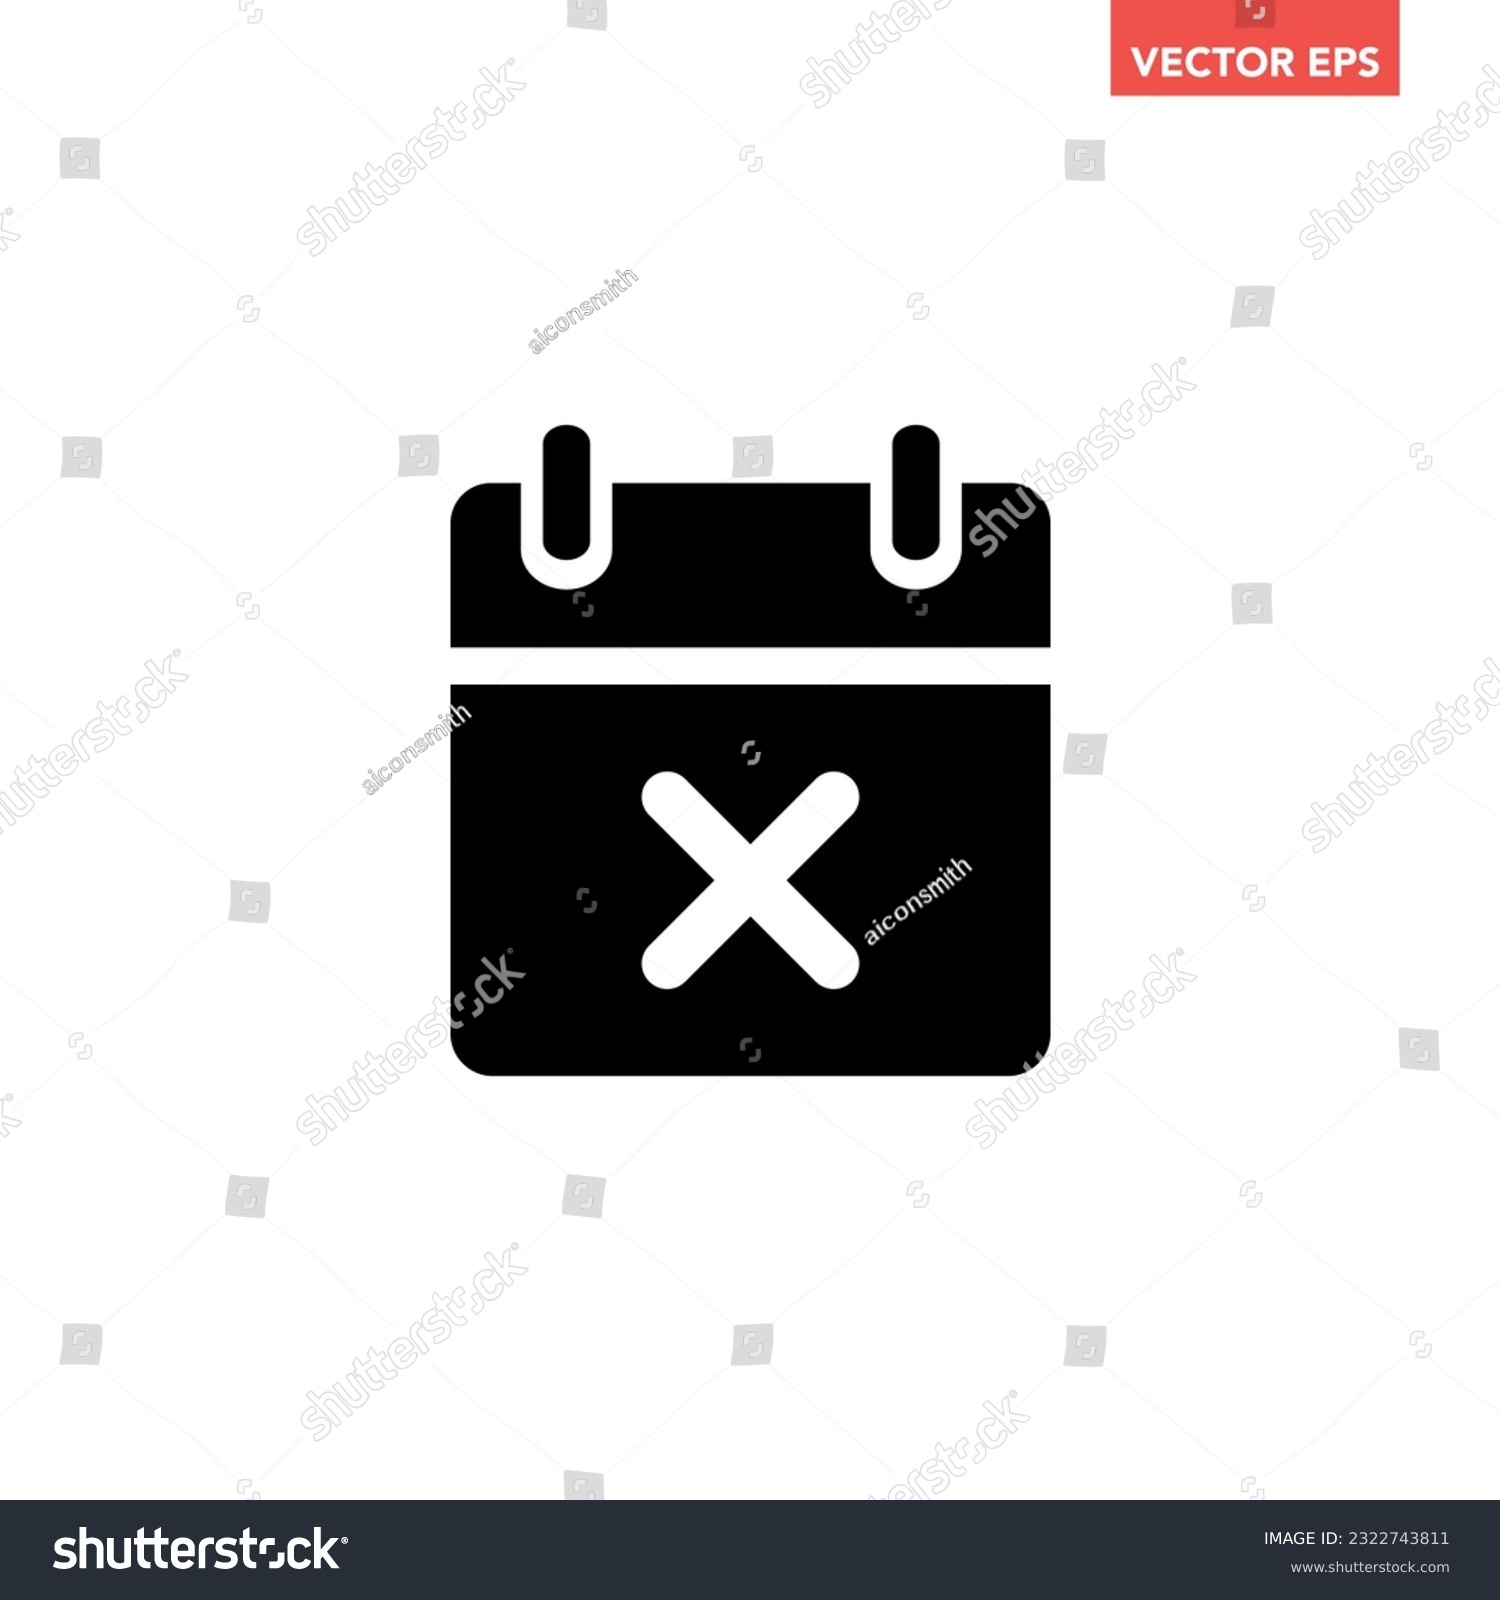 Black single appointment canceled icon, simple calendar failed flat design illustration pictogram vector for app ads web banner button ui ux interface elements isolated on white background #2322743811